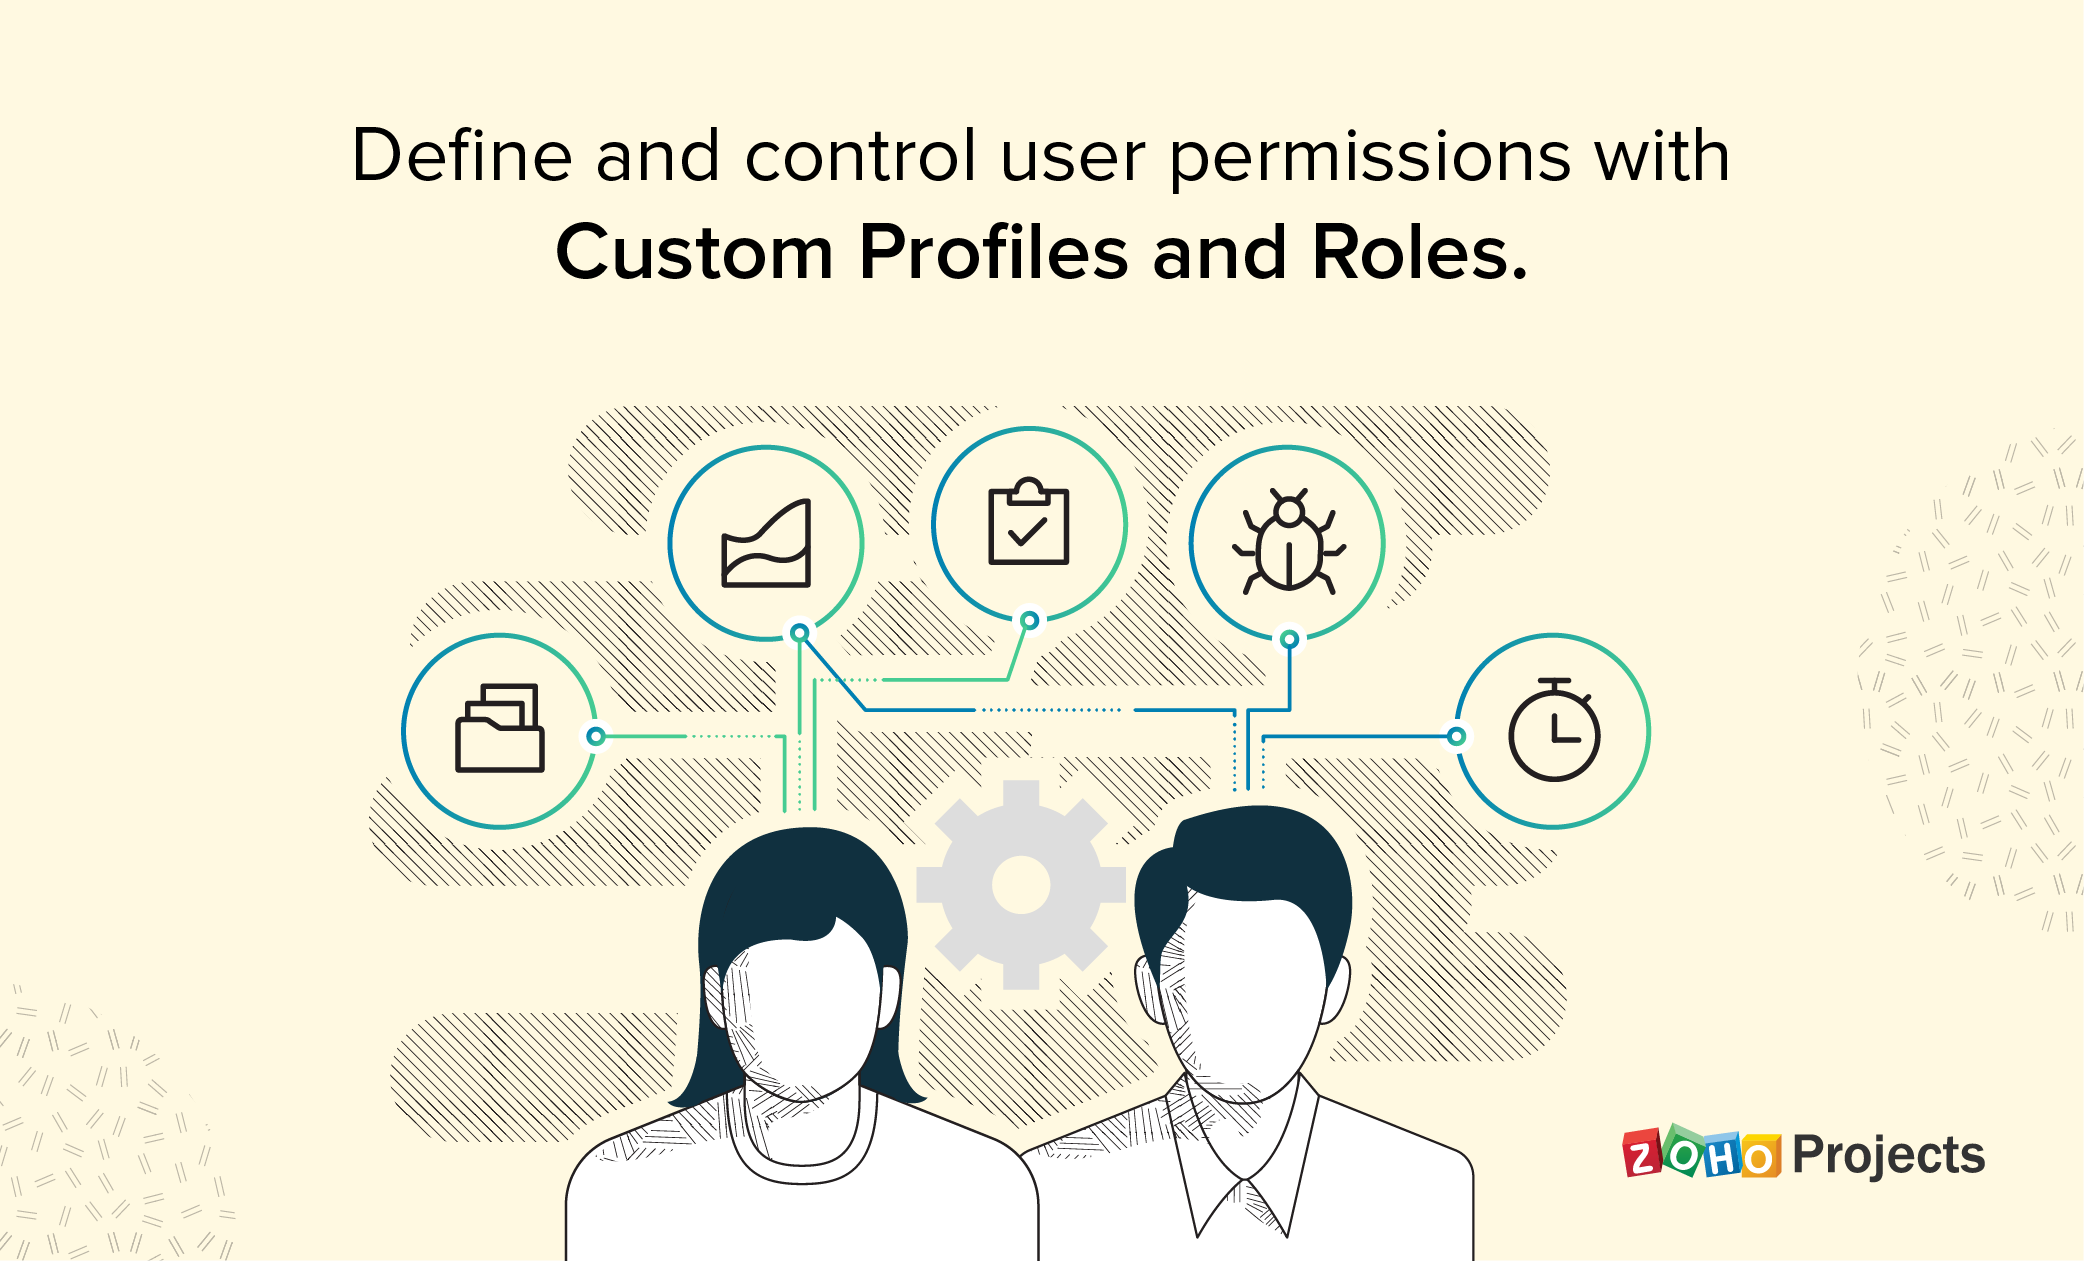 Roles, Profiles, and Permissions: Customize and Control User Privileges